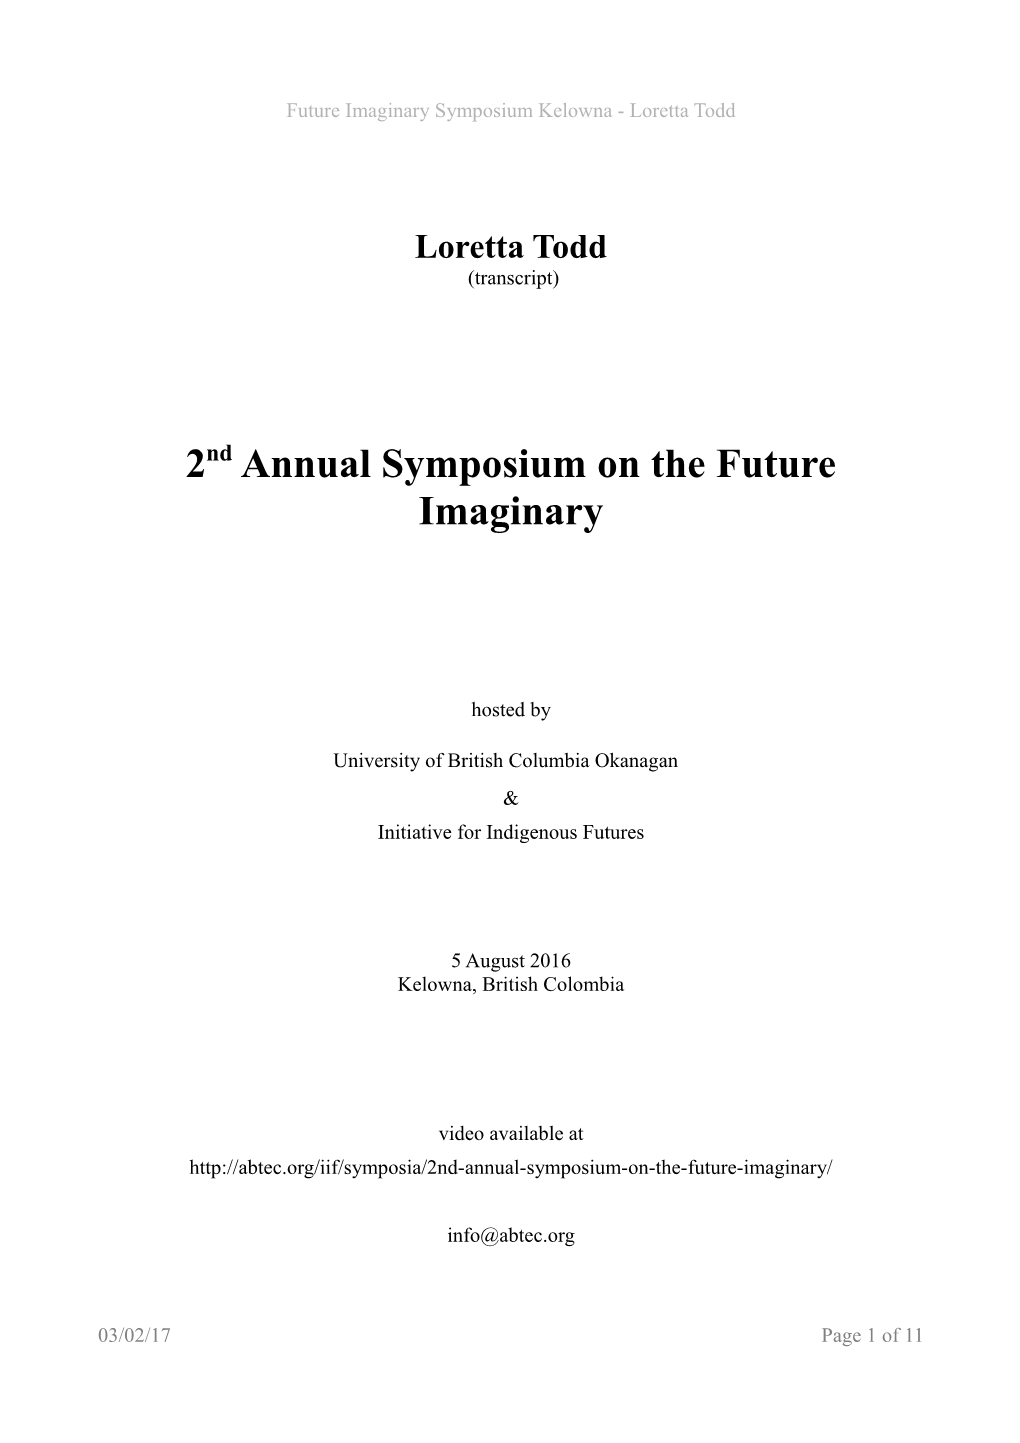 2Nd Annual Symposium on the Future Imaginary